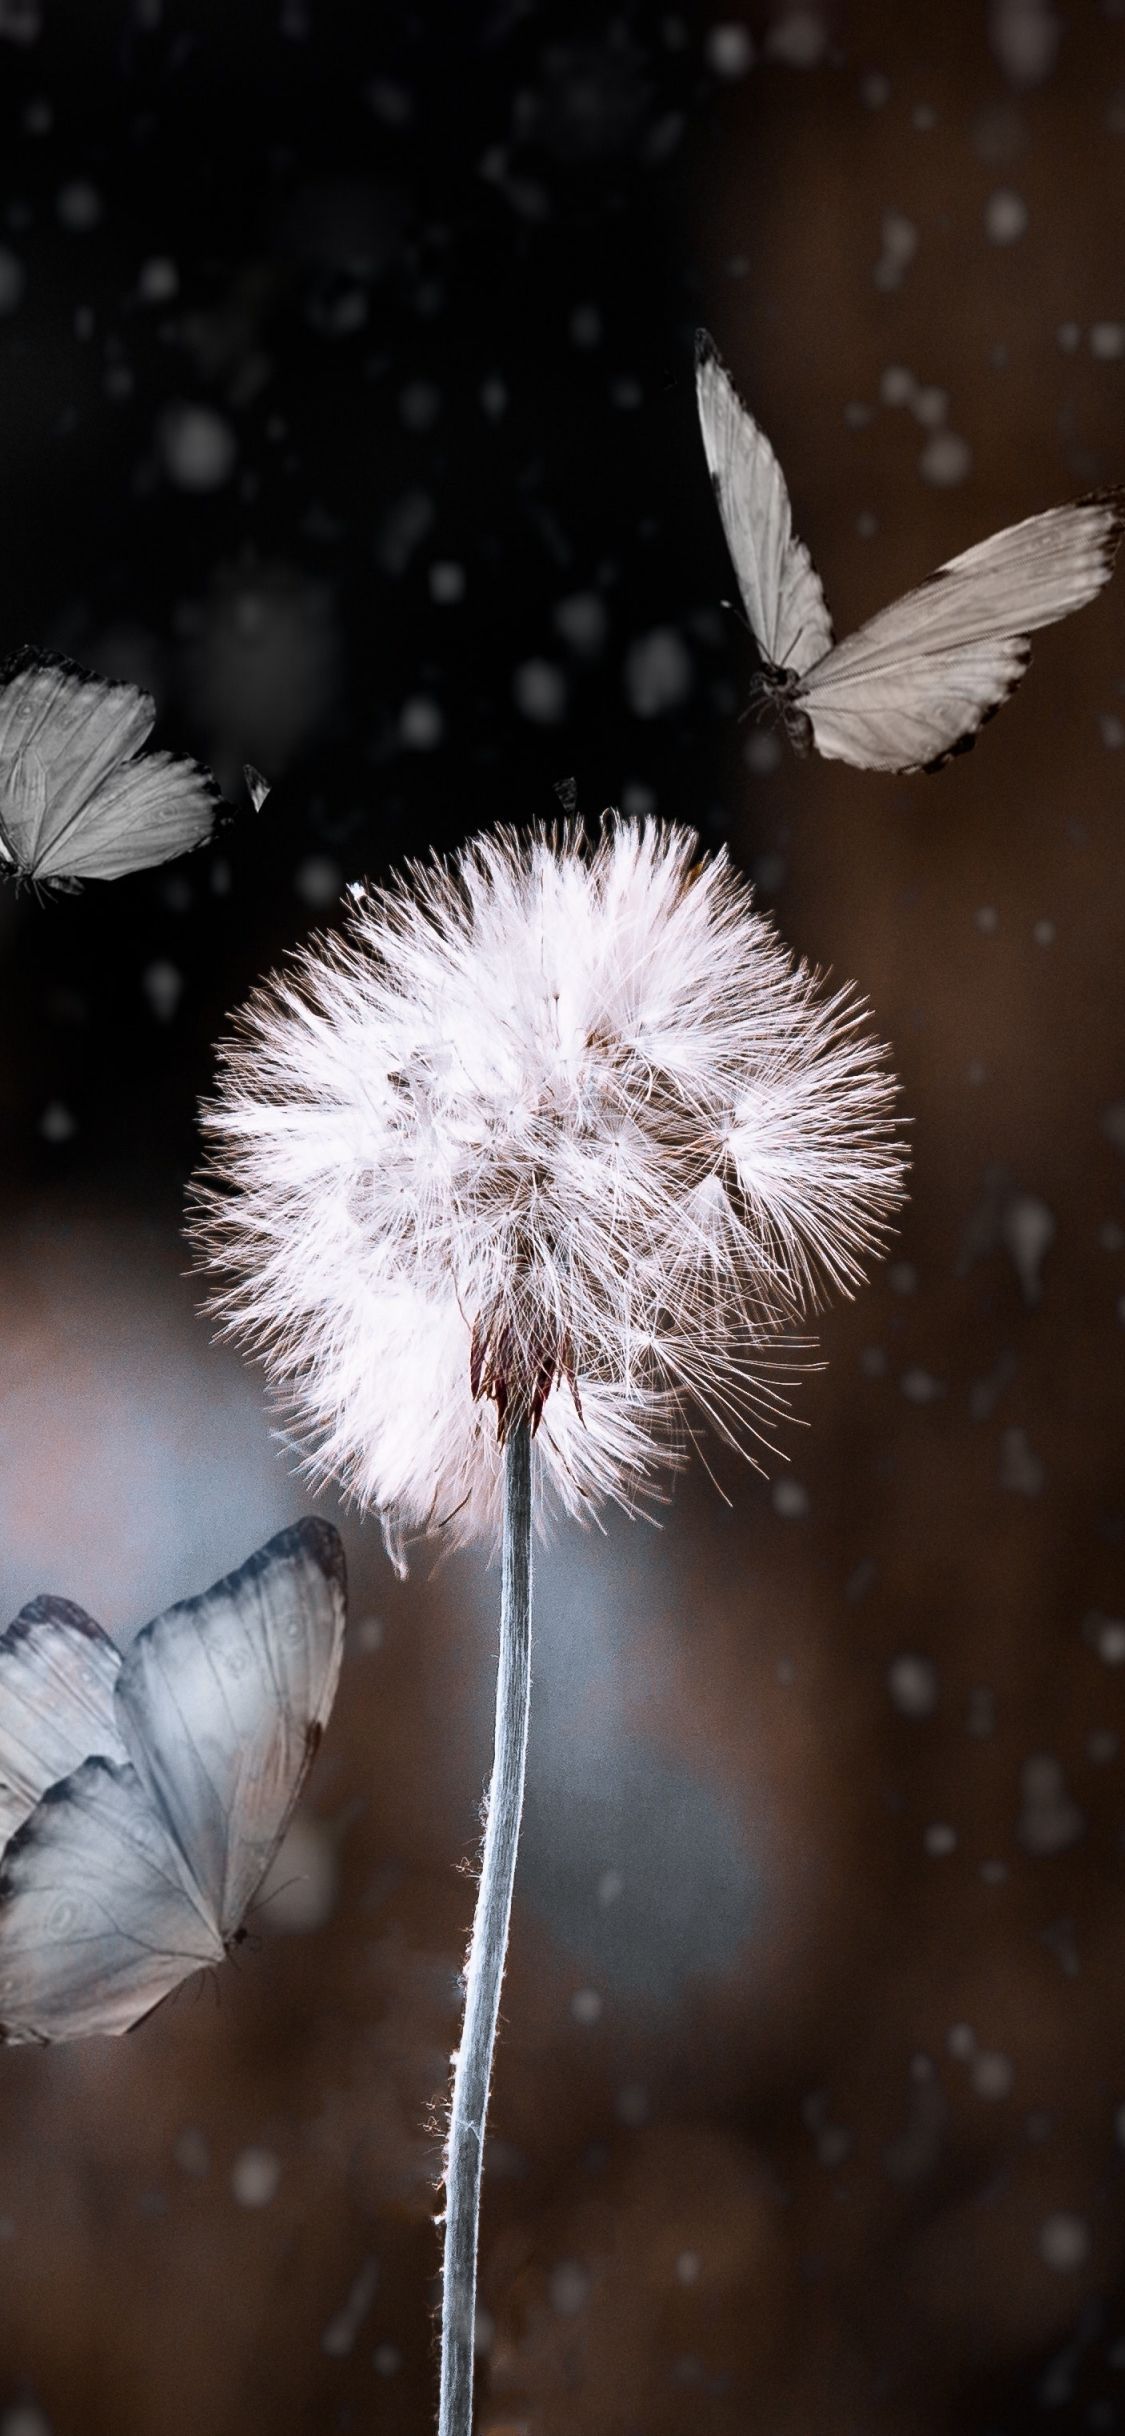 Download wallpaper 1125x2436 bokeh, dandelion and butterfly, blur, iphone x, 1125x2436 HD background, 16040